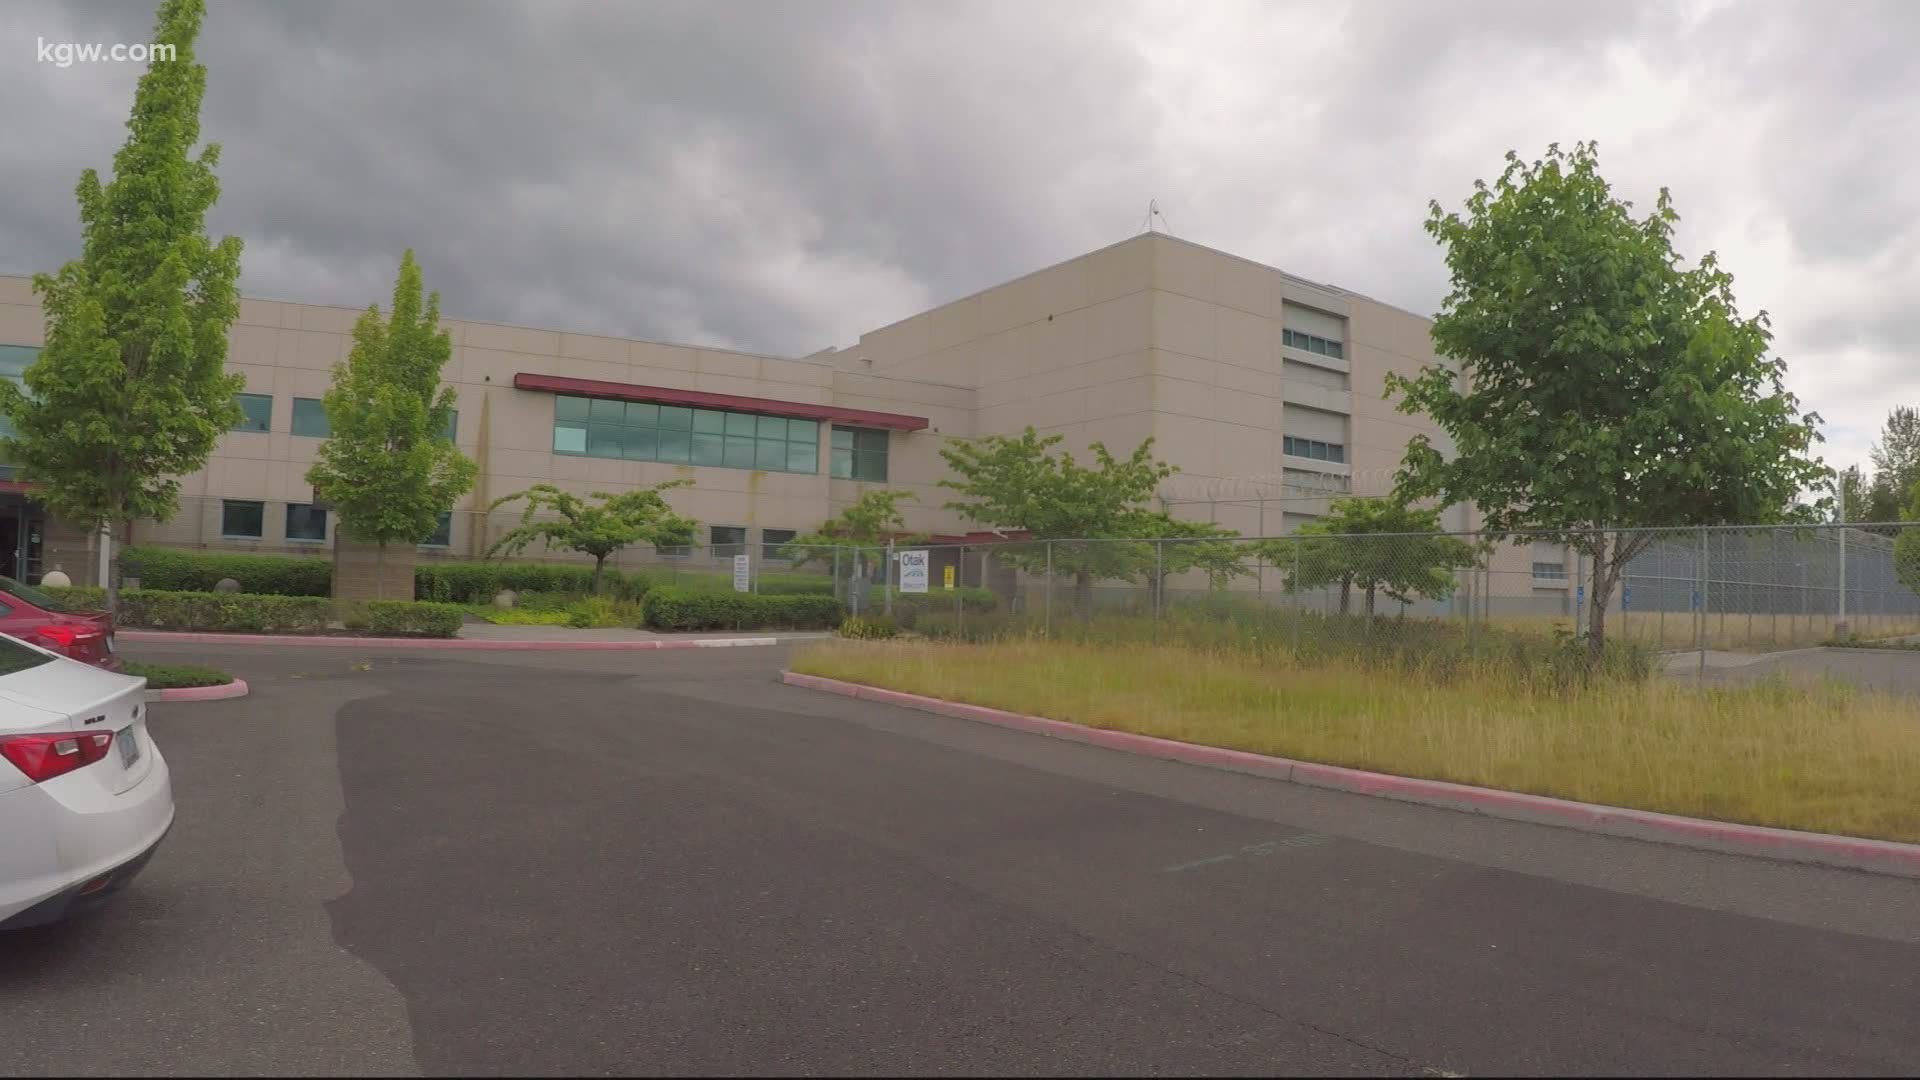 The Wapato Jail could reopen as a shelter for homeless this fall. Maggie Vespa reports.